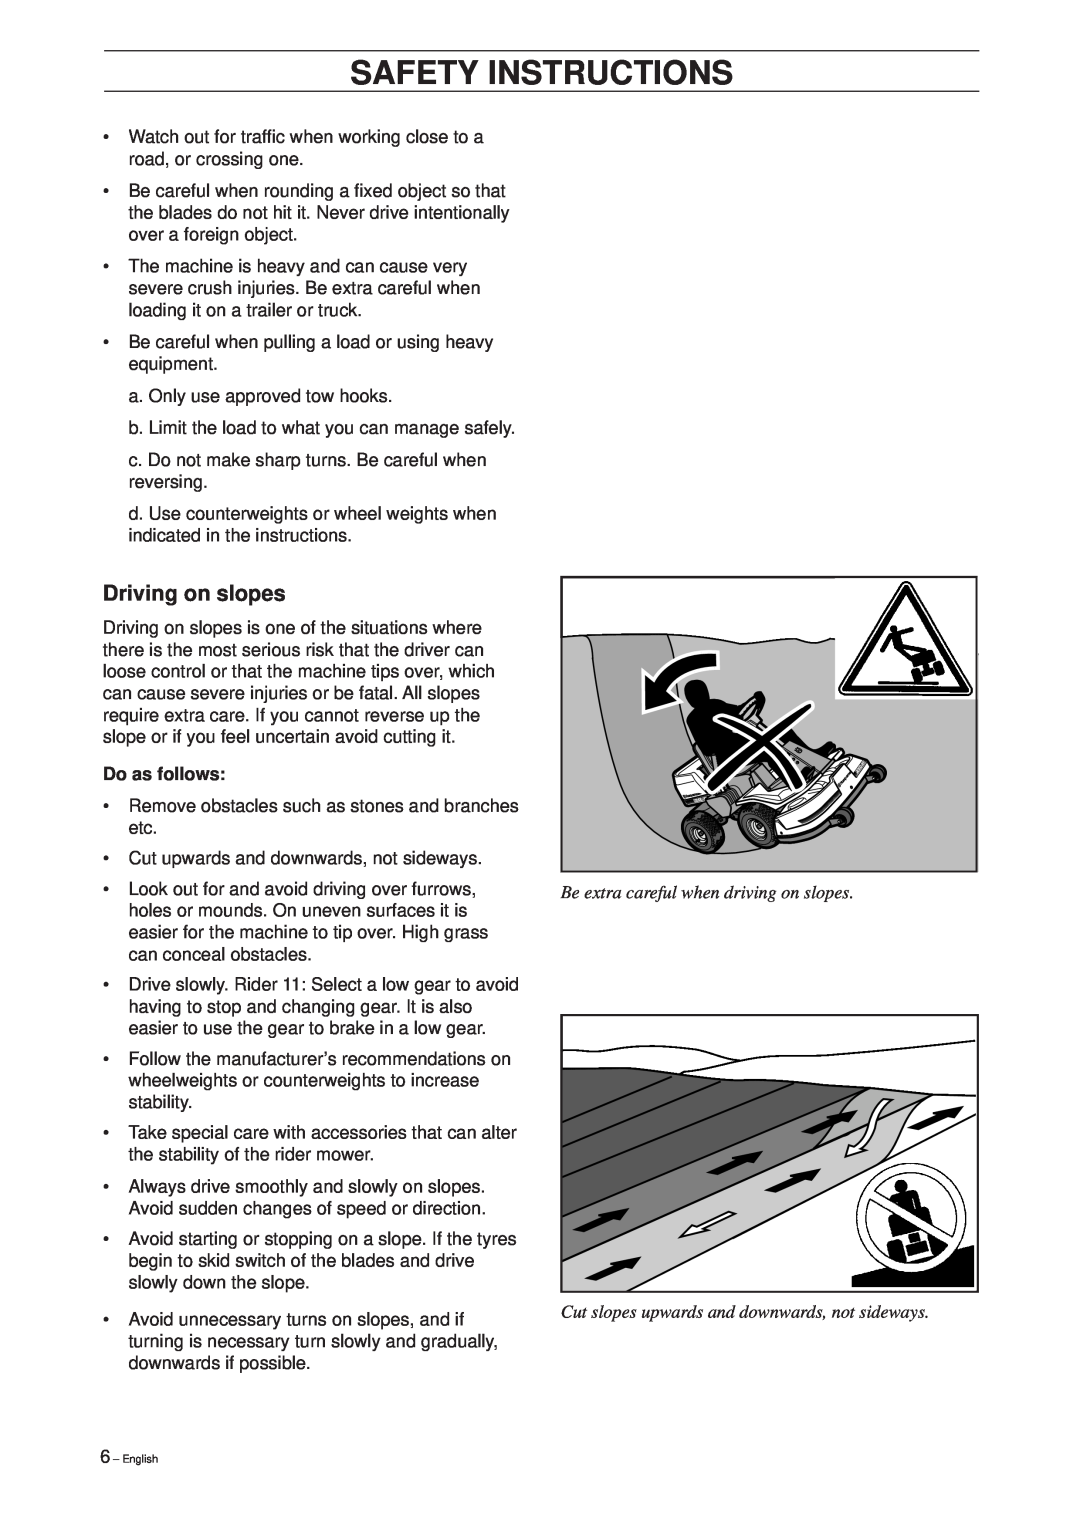 Husqvarna 11 Bio, 39765 Driving on slopes, Do as follows, Be extra careful when driving on slopes, Safety Instructions 